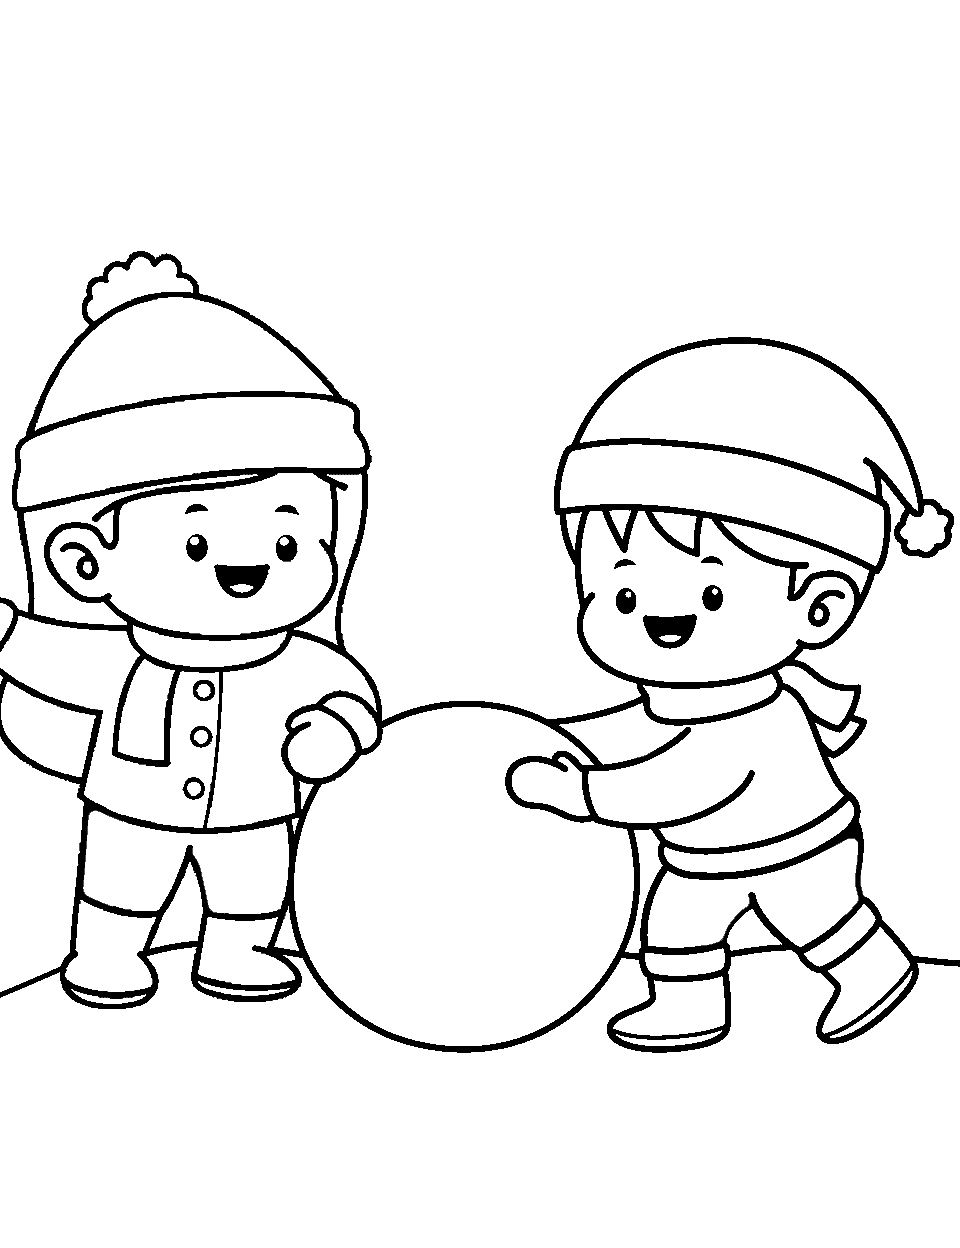 Snowball Shenanigans Coloring Page - Kids making a giant snowball.